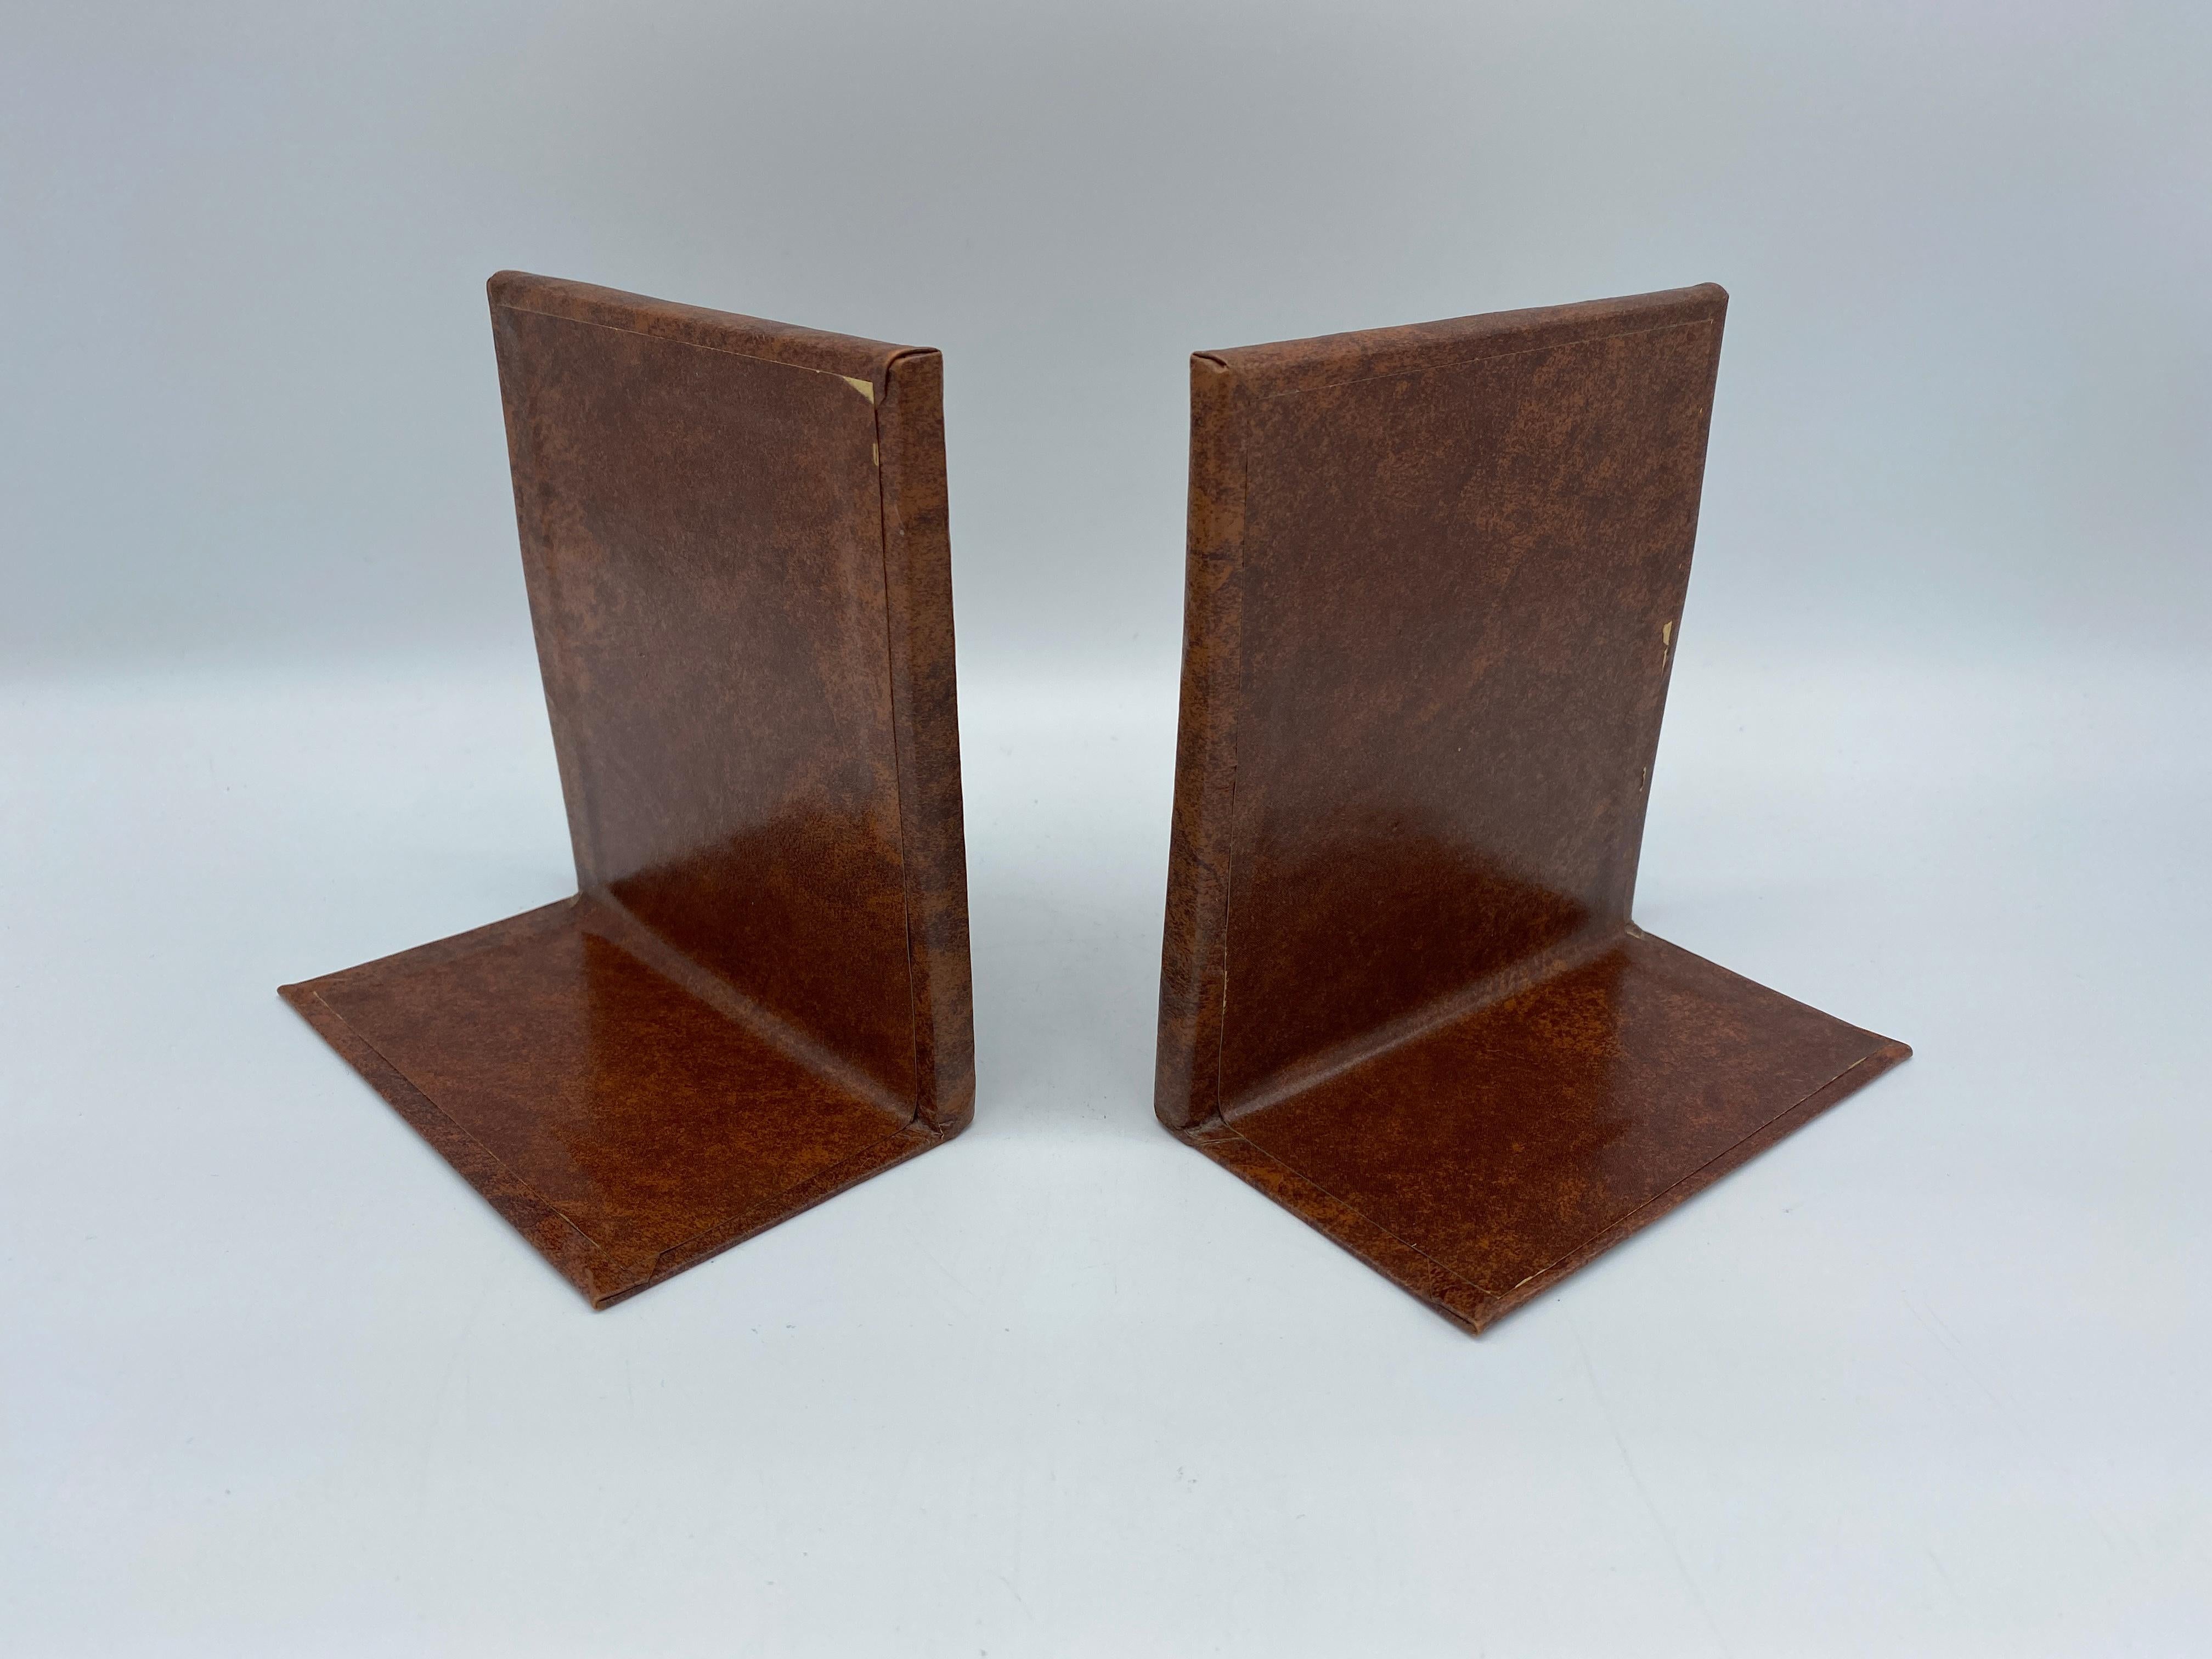 Italian Leather Bookends with Gold Debossed Border, Pair, 1960s For Sale 1